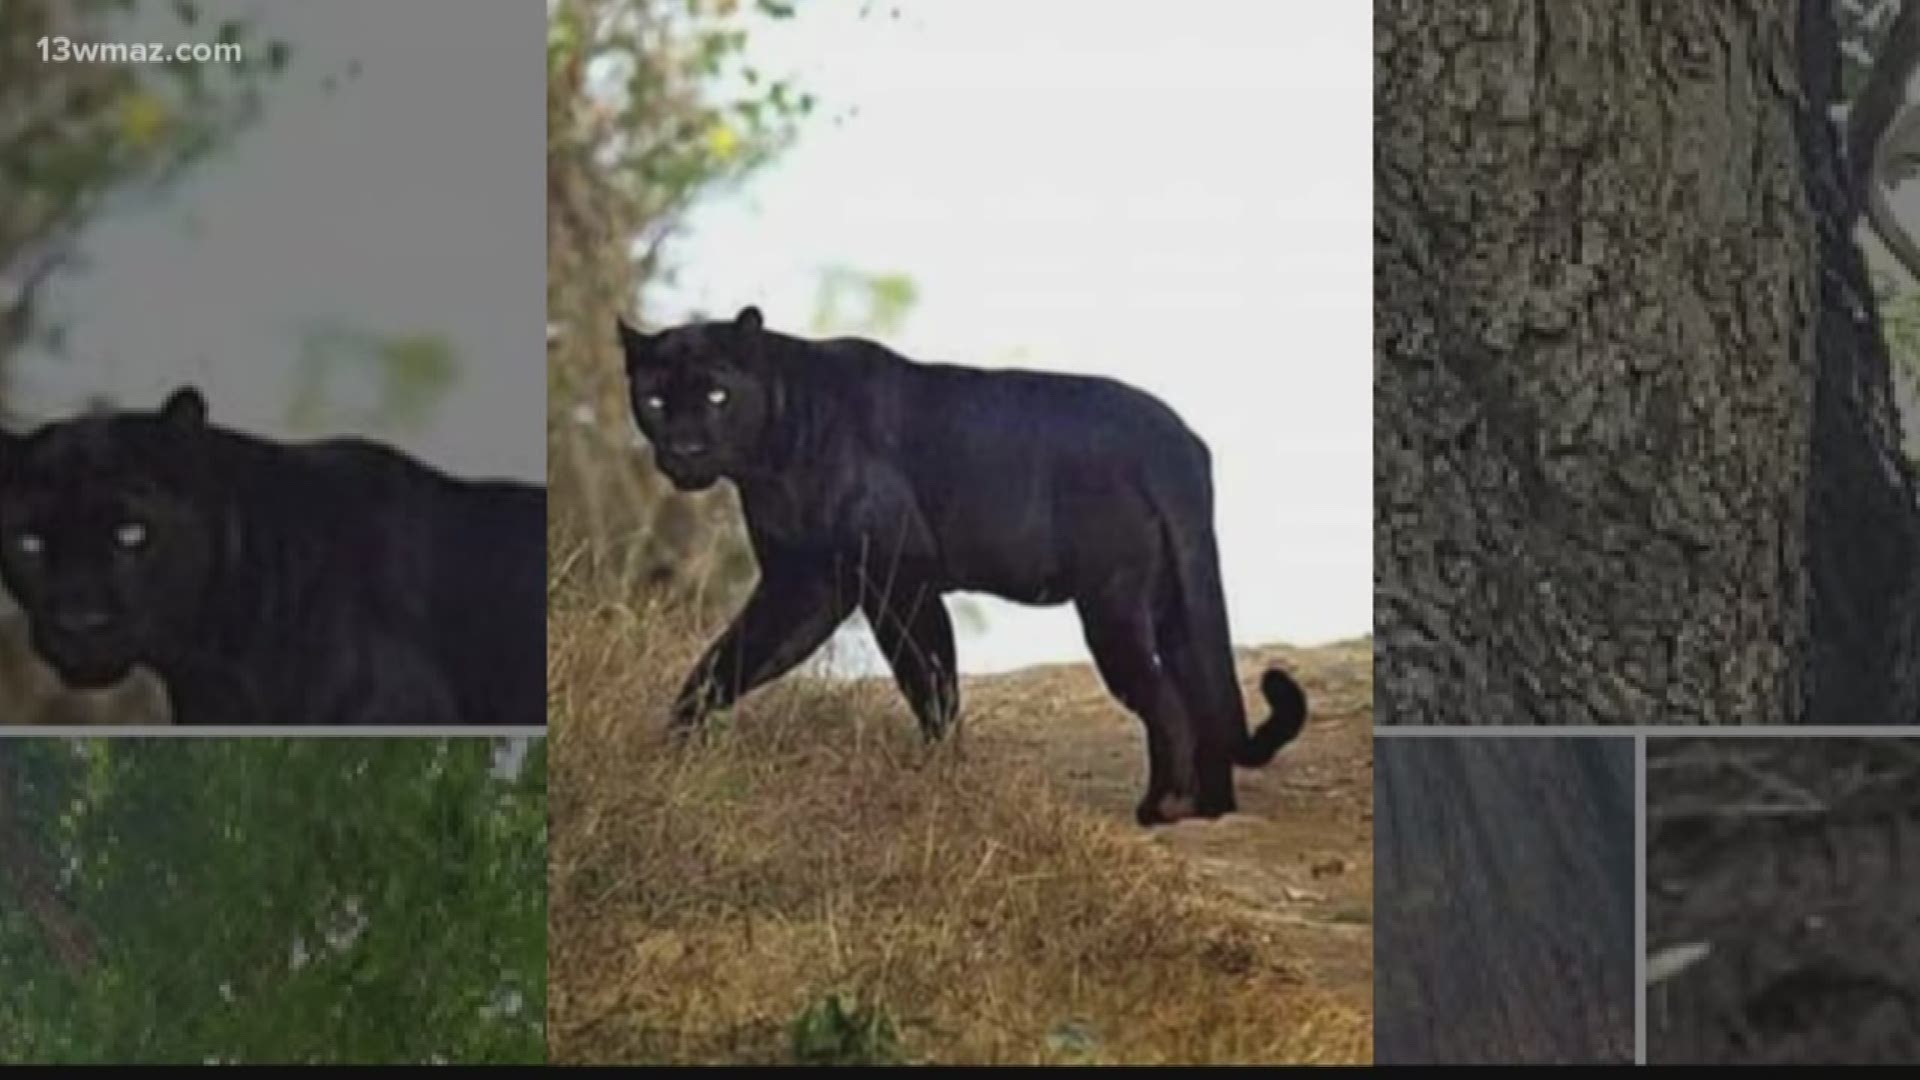 Over the weekend, a man in Laurens County made a post about an alleged 'black panther' sighting there that had the internet buzzing. The post was shared hundreds of times and even had some people concerned about letting their kids or pets outside. But is it true?